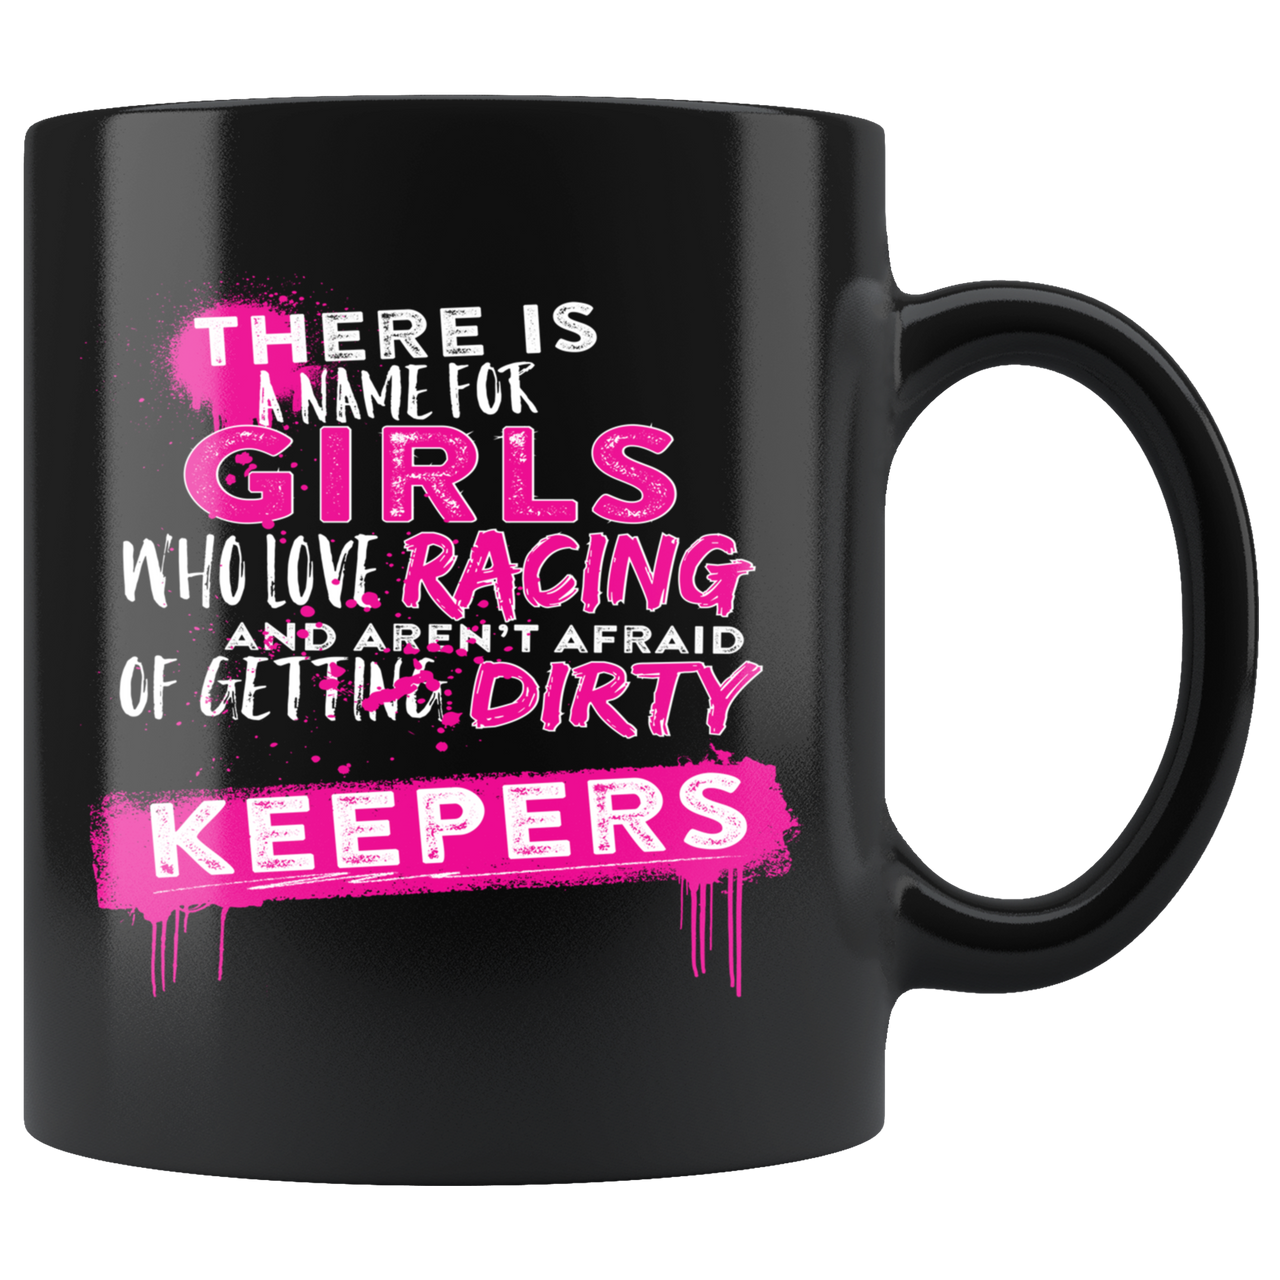 There Is A Name For Girls Who Love Racing And Aren't Afraid Of Getting Dirty Keepers Mug!